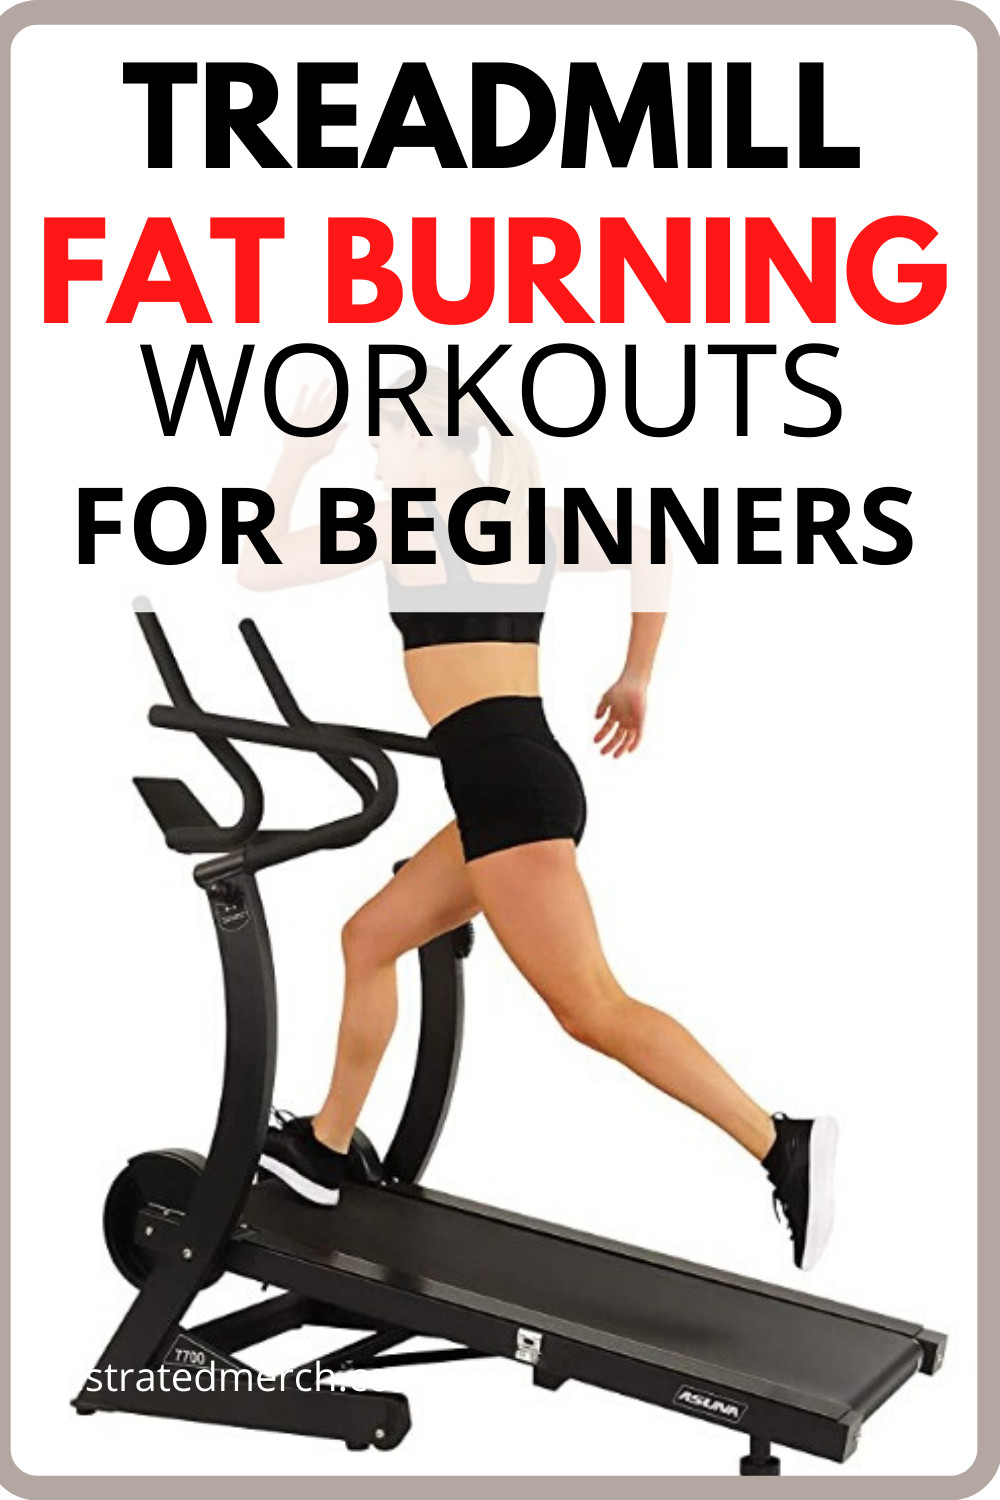 Treadmill Fat Burning Workout
 Here are the Best Treadmill Fat Burning Workouts For